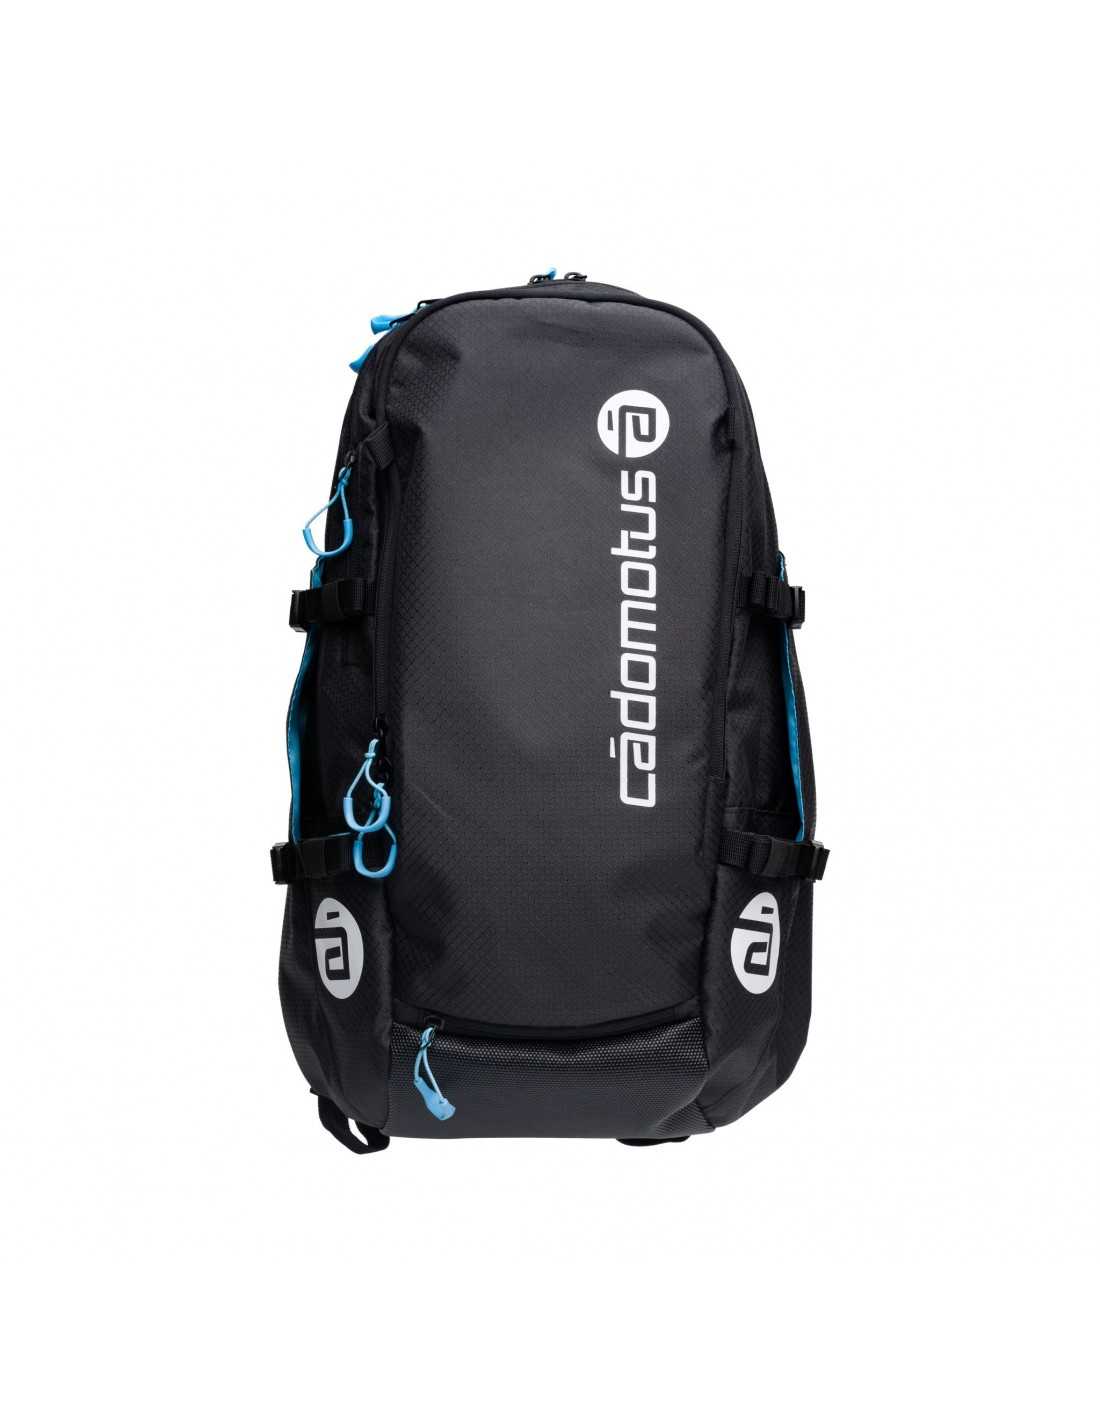 Omron Bags Laptop Backpack With USB Charging Port, Water Resistant With  College Bag at Rs 250 | College Bag in Bhiwandi | ID: 2851360442891